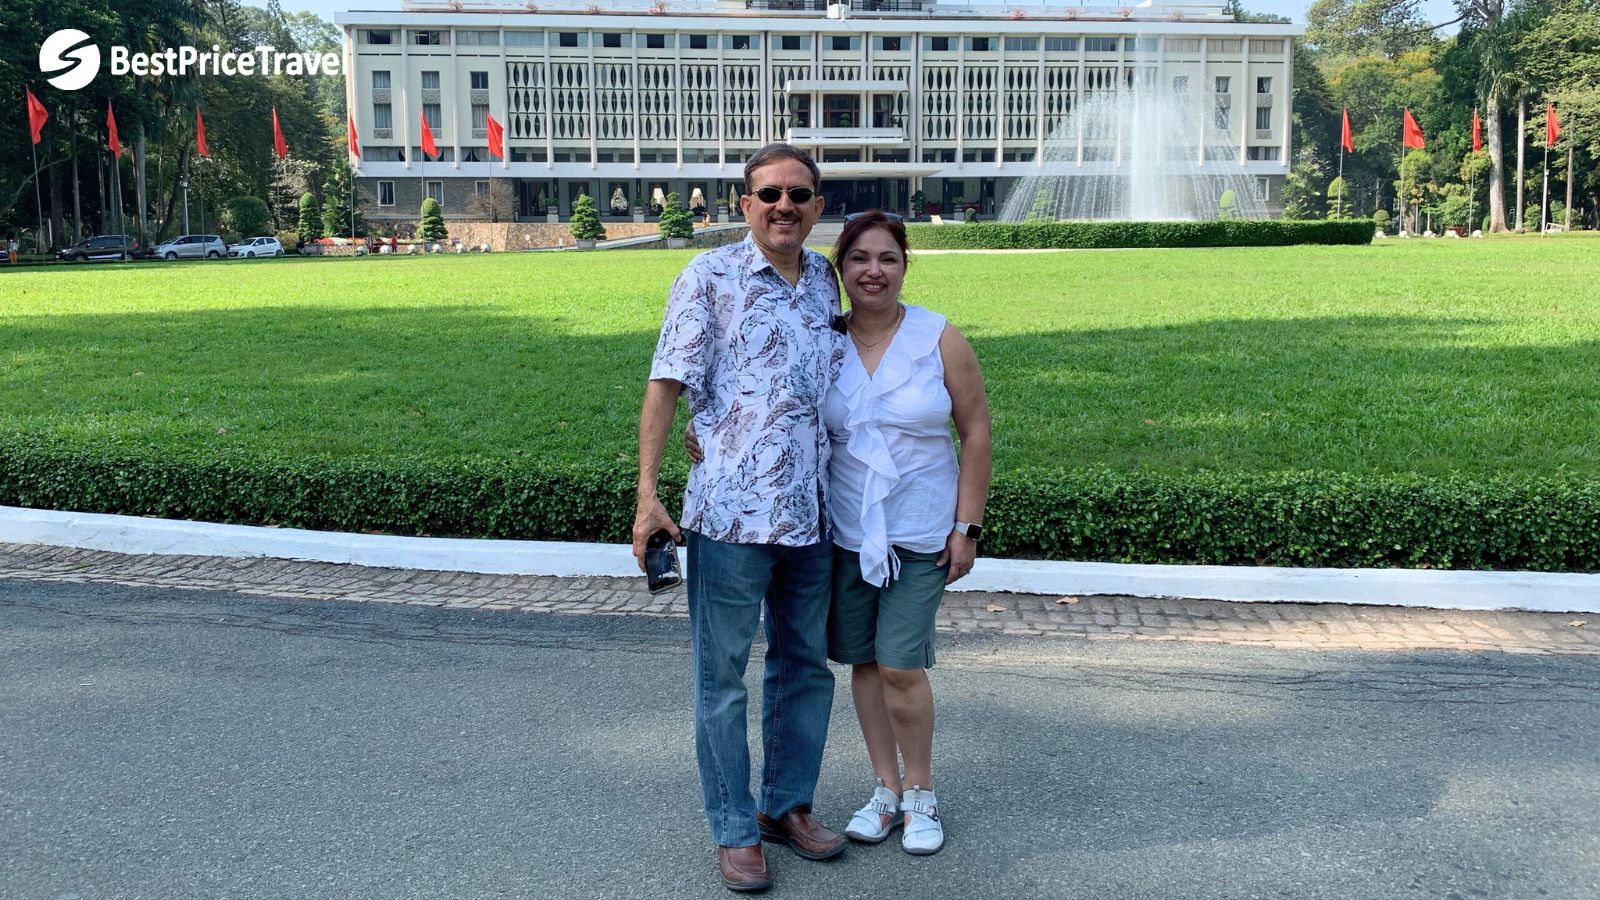 Day 12 Learn More About Vietnam History At The Reunification Palace